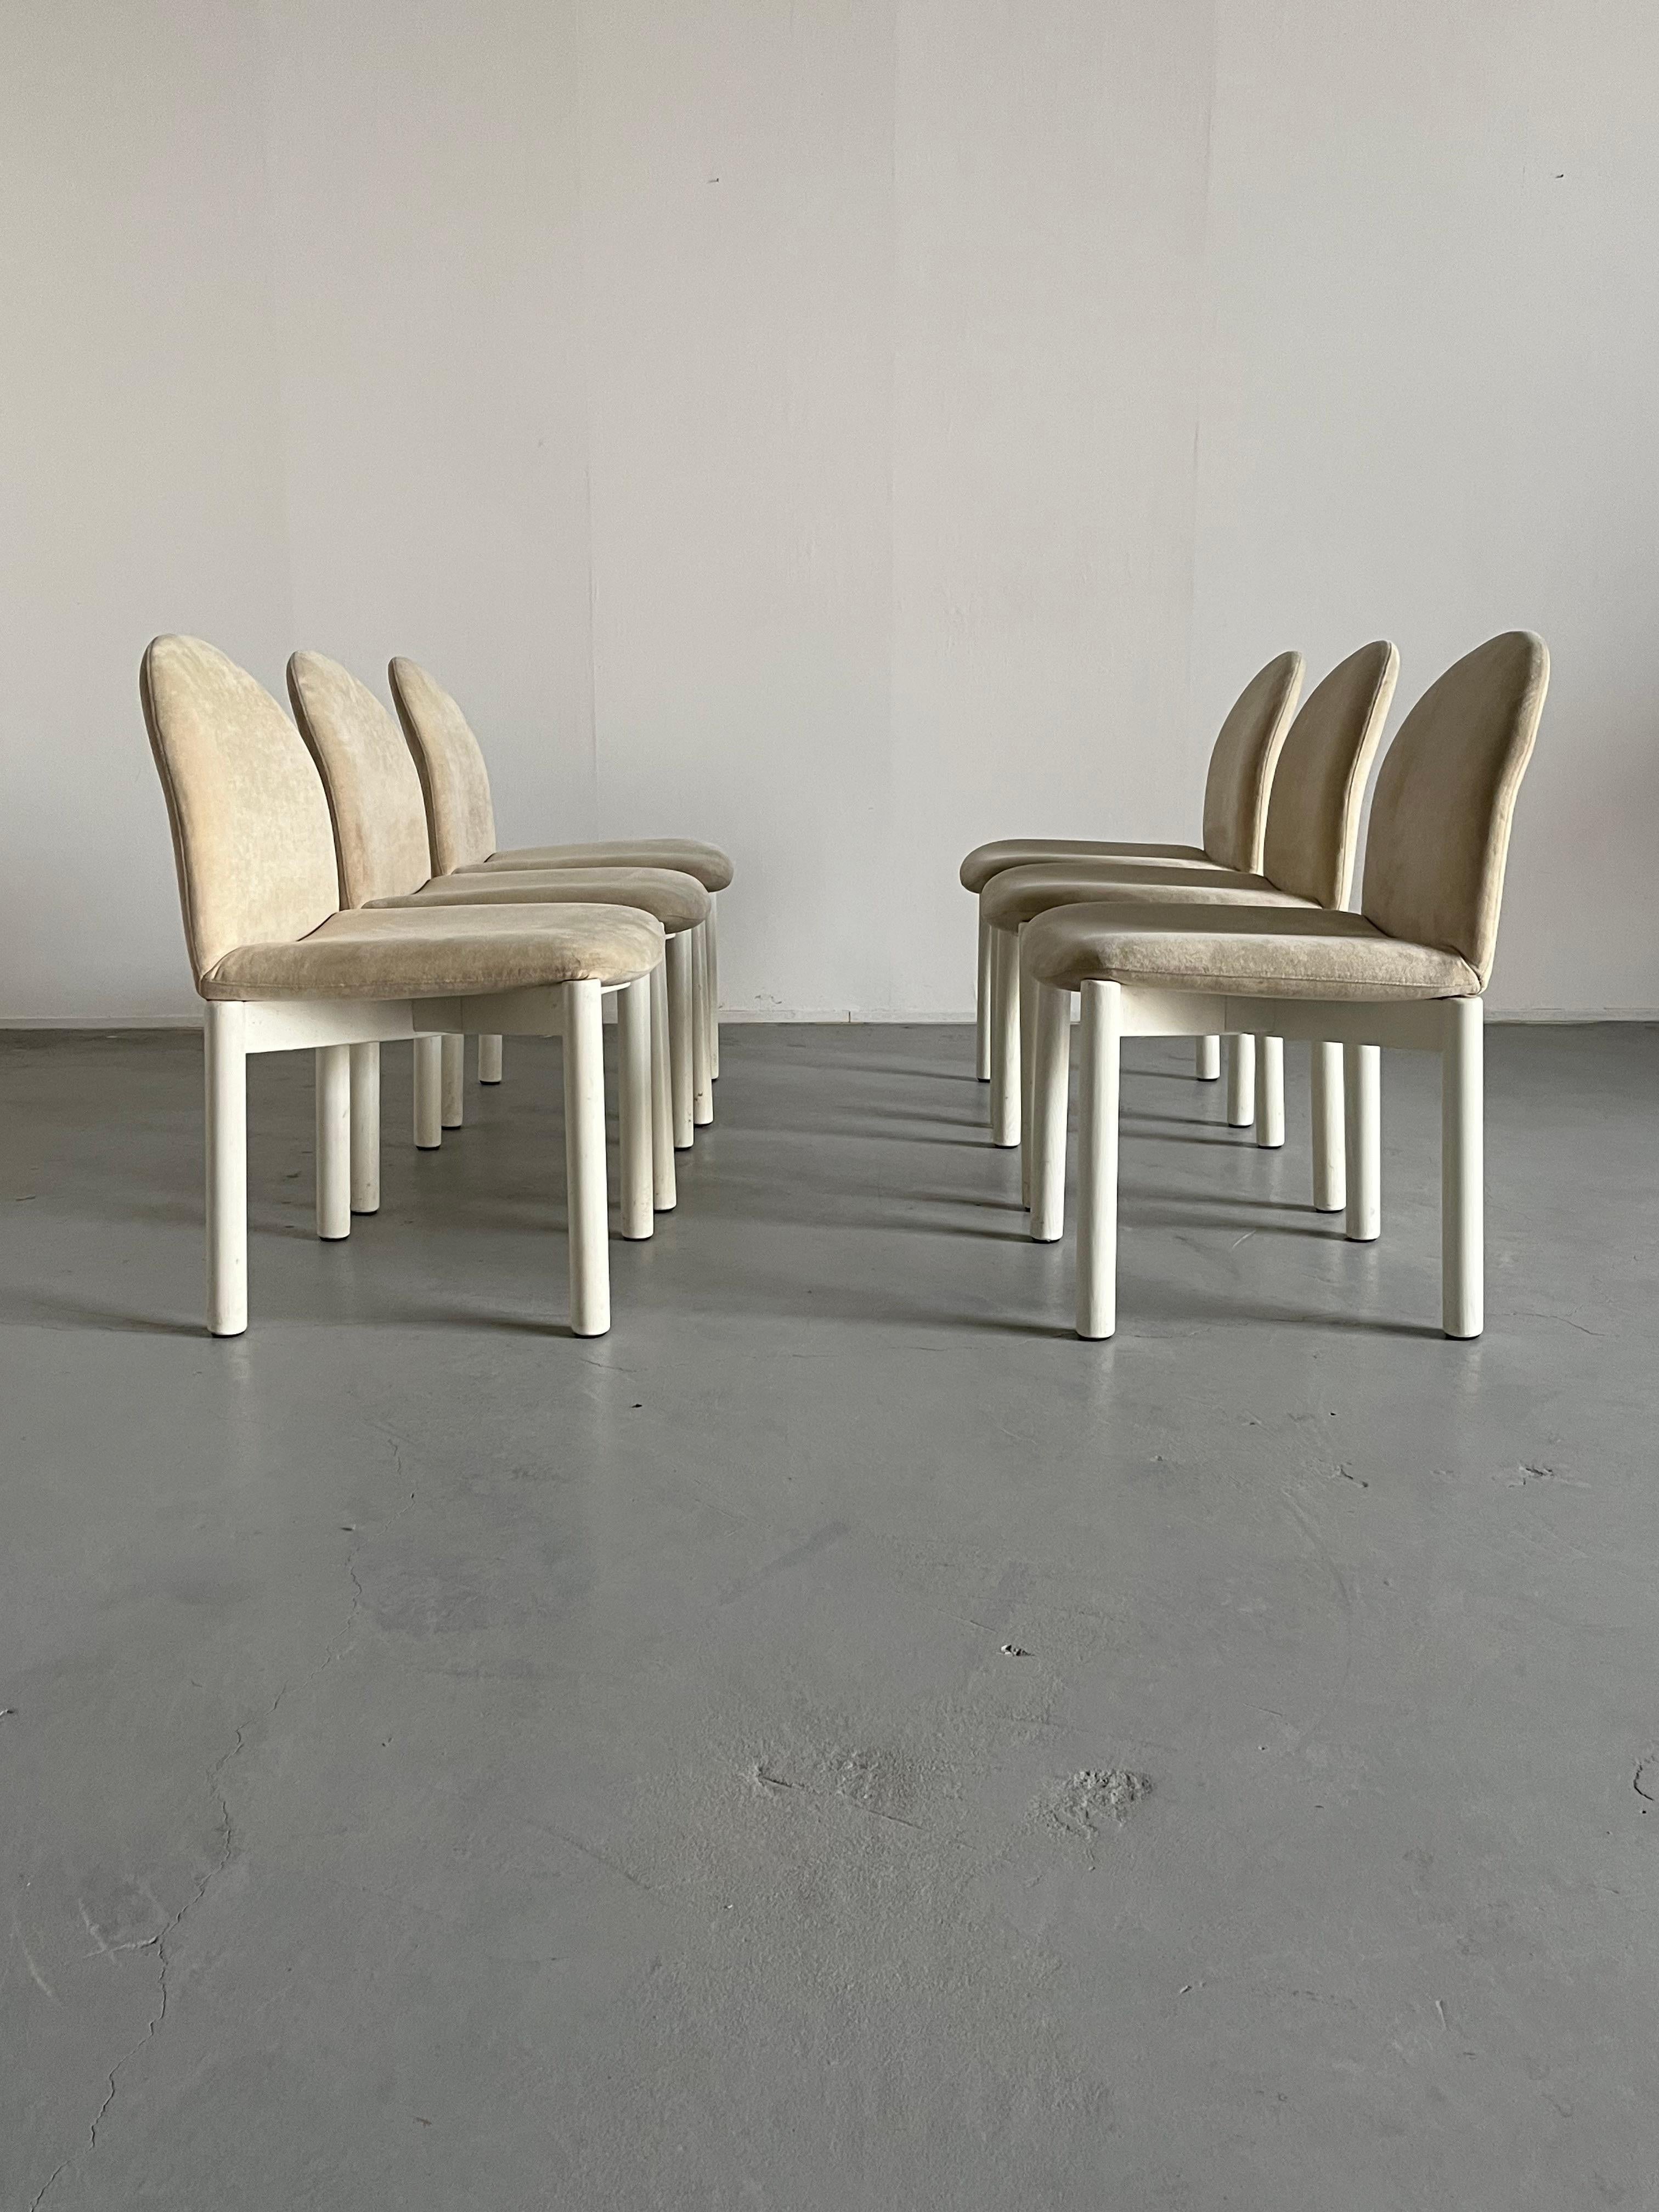 Set of 6 Mid-Century Modern 'Combra' Dining Chairs by Cor, 1980s Germany 2